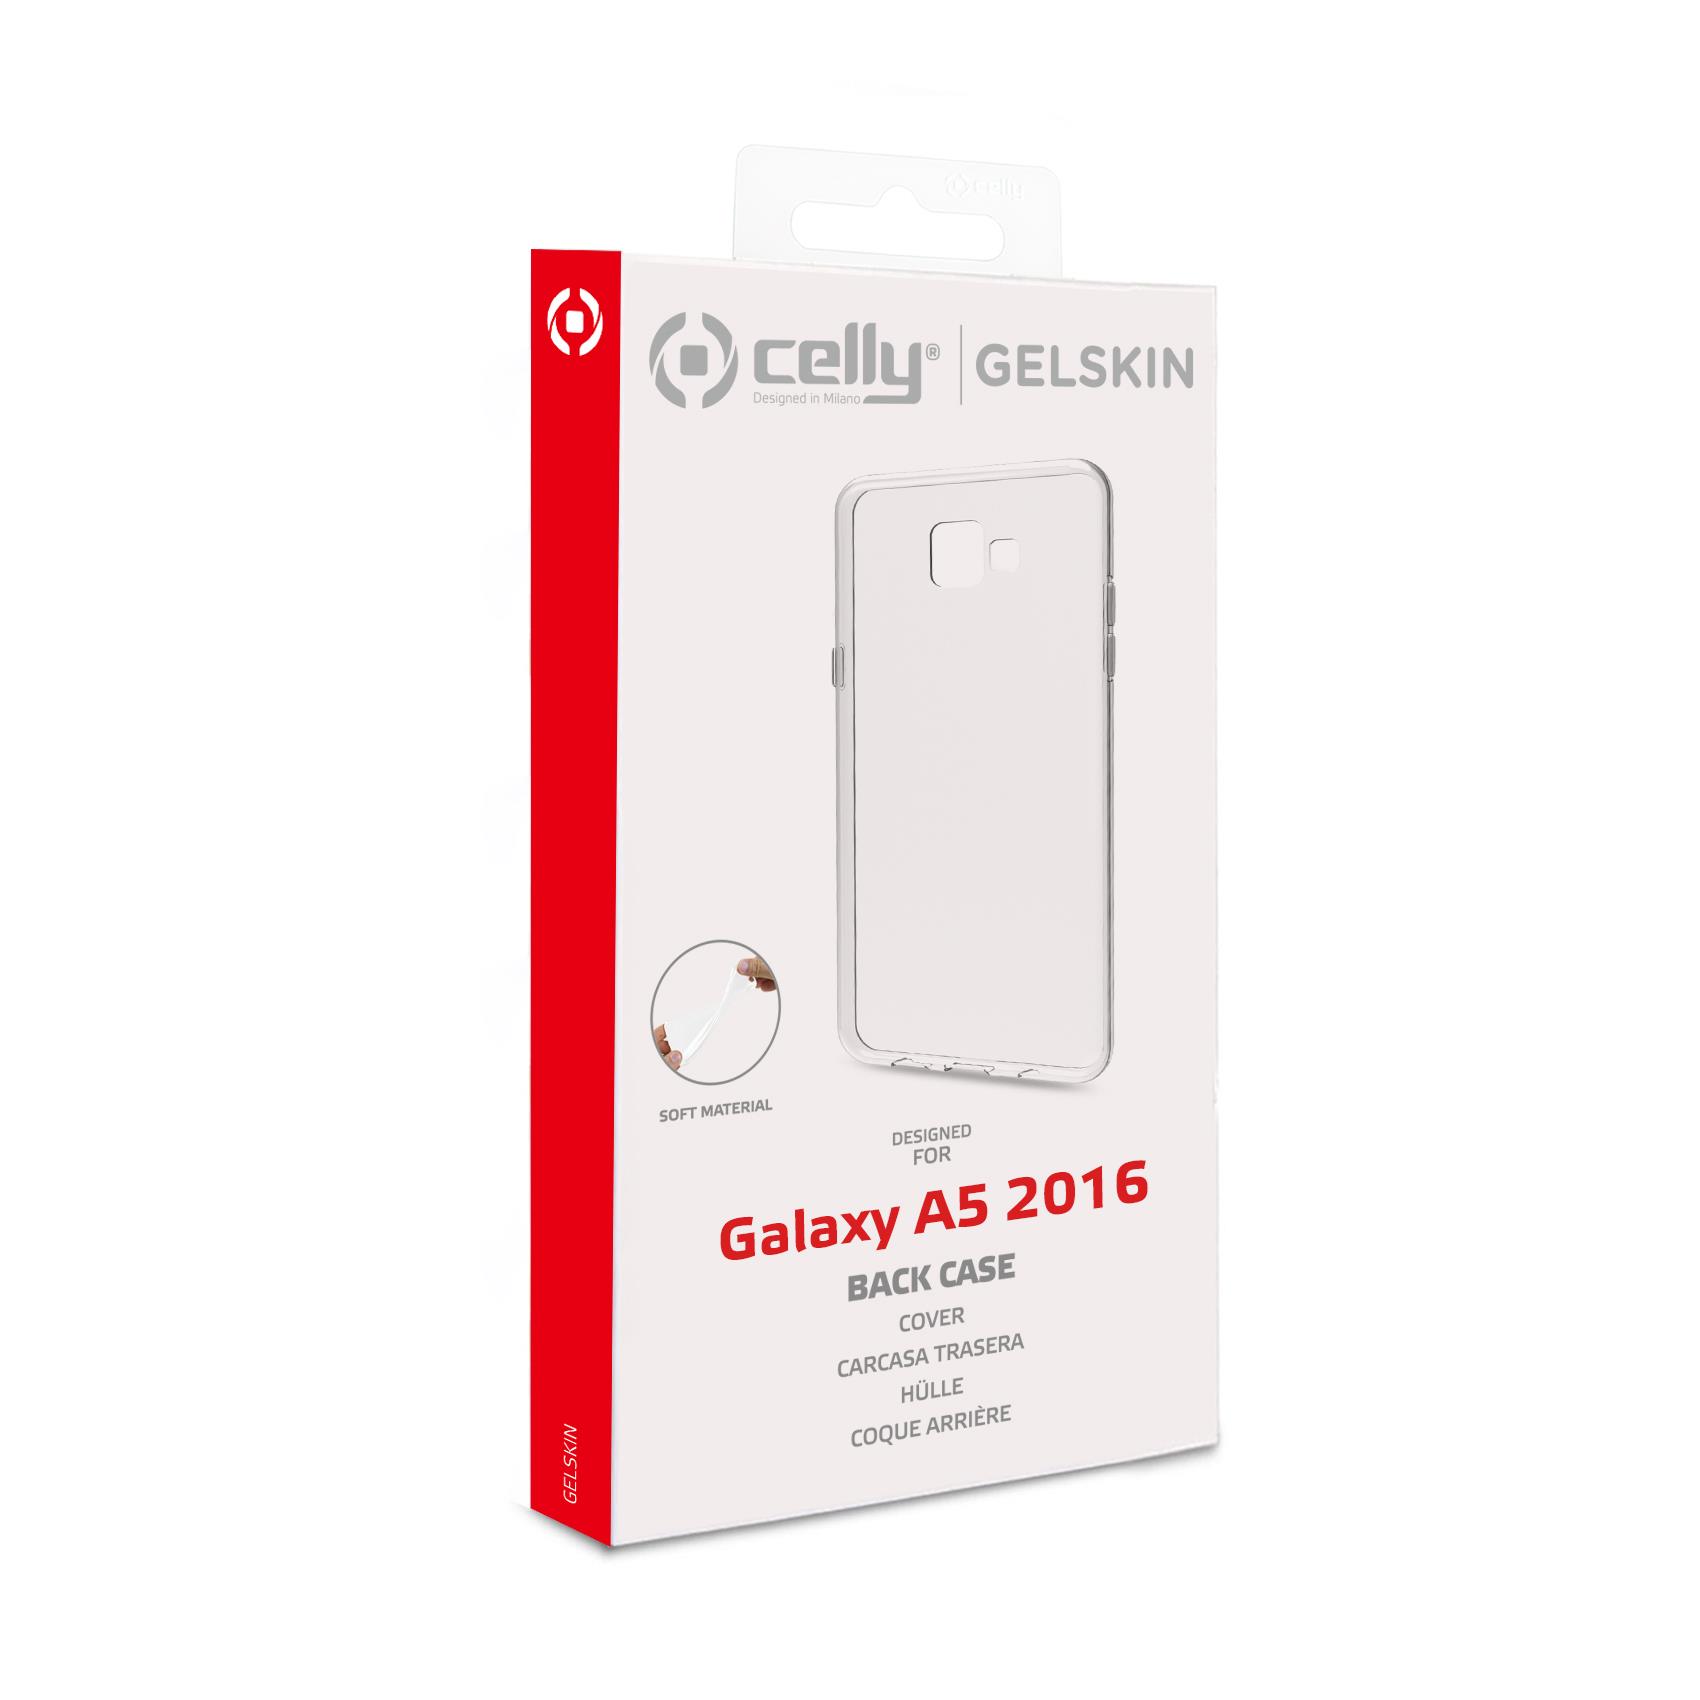 Tpu Cover Galaxy A5 2016 Celly Gelskin535 8021735716129